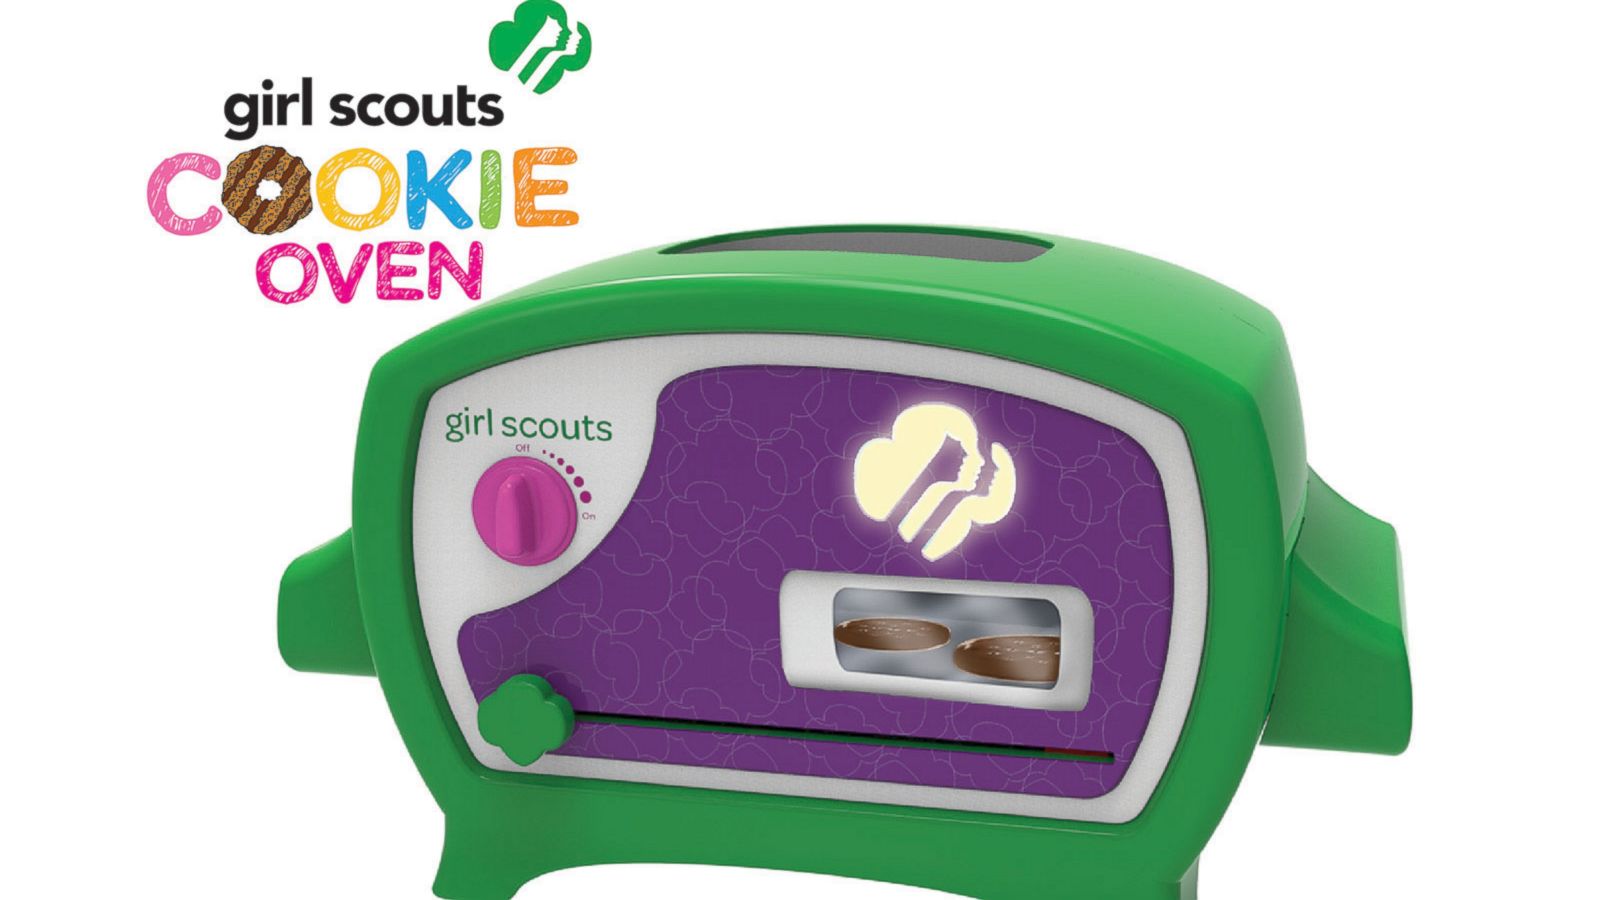 https://s.abcnews.com/images/Lifestyle/ht_girl_scout_cookie_oven_kb_150225_16x9_1600.jpg